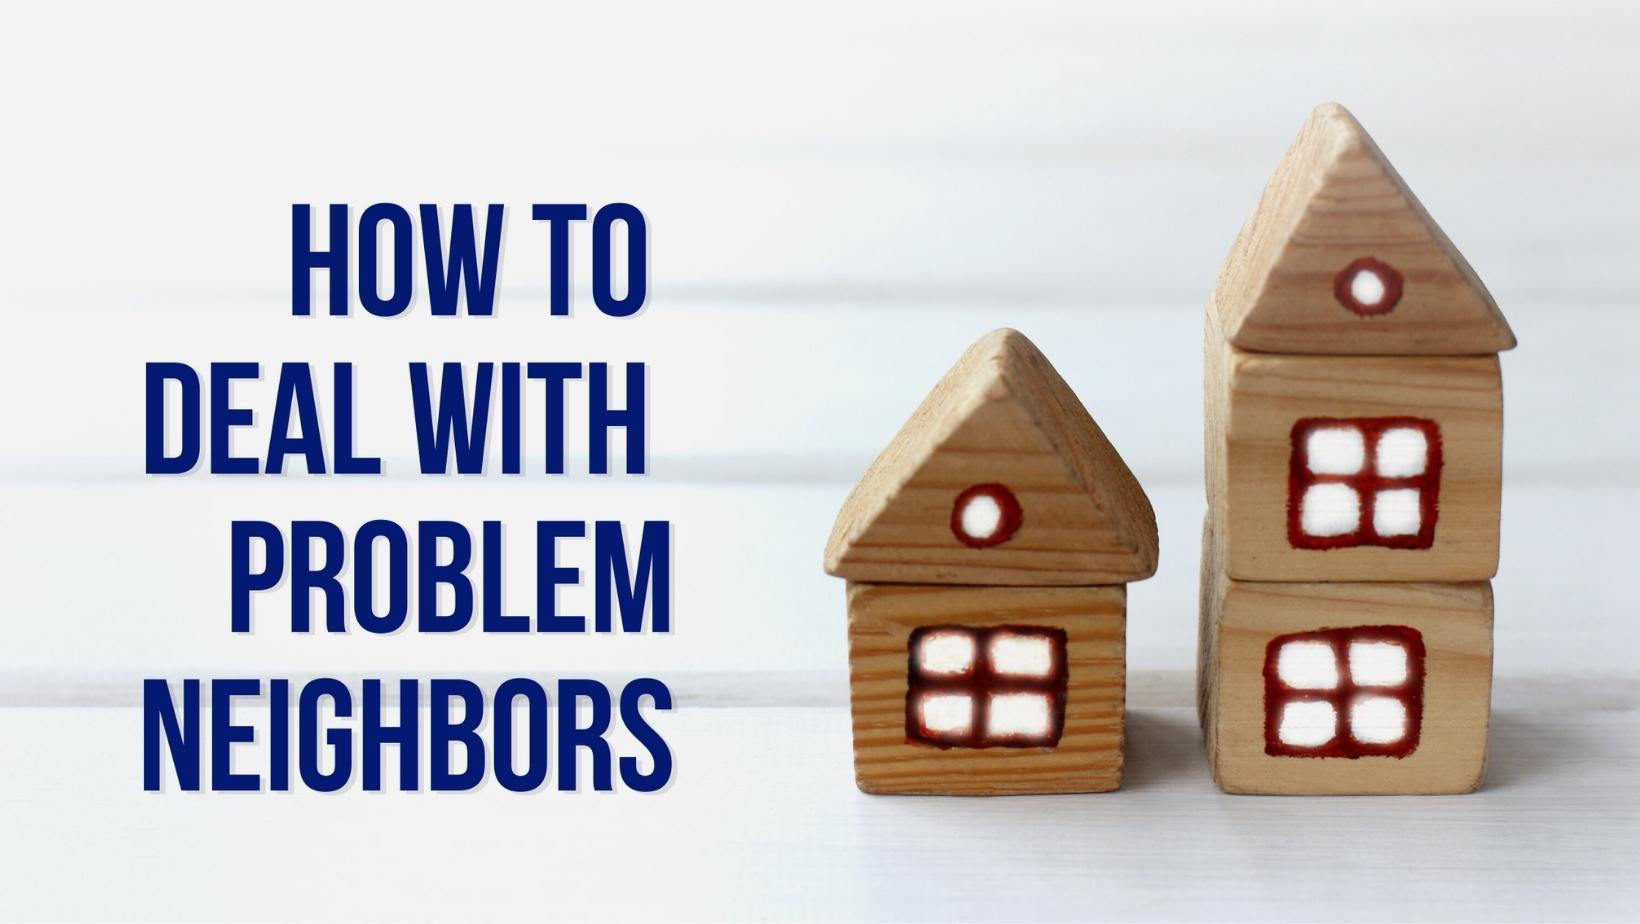 A wood block house sits on a white background. Text reads "how to deal with problem neighbors"